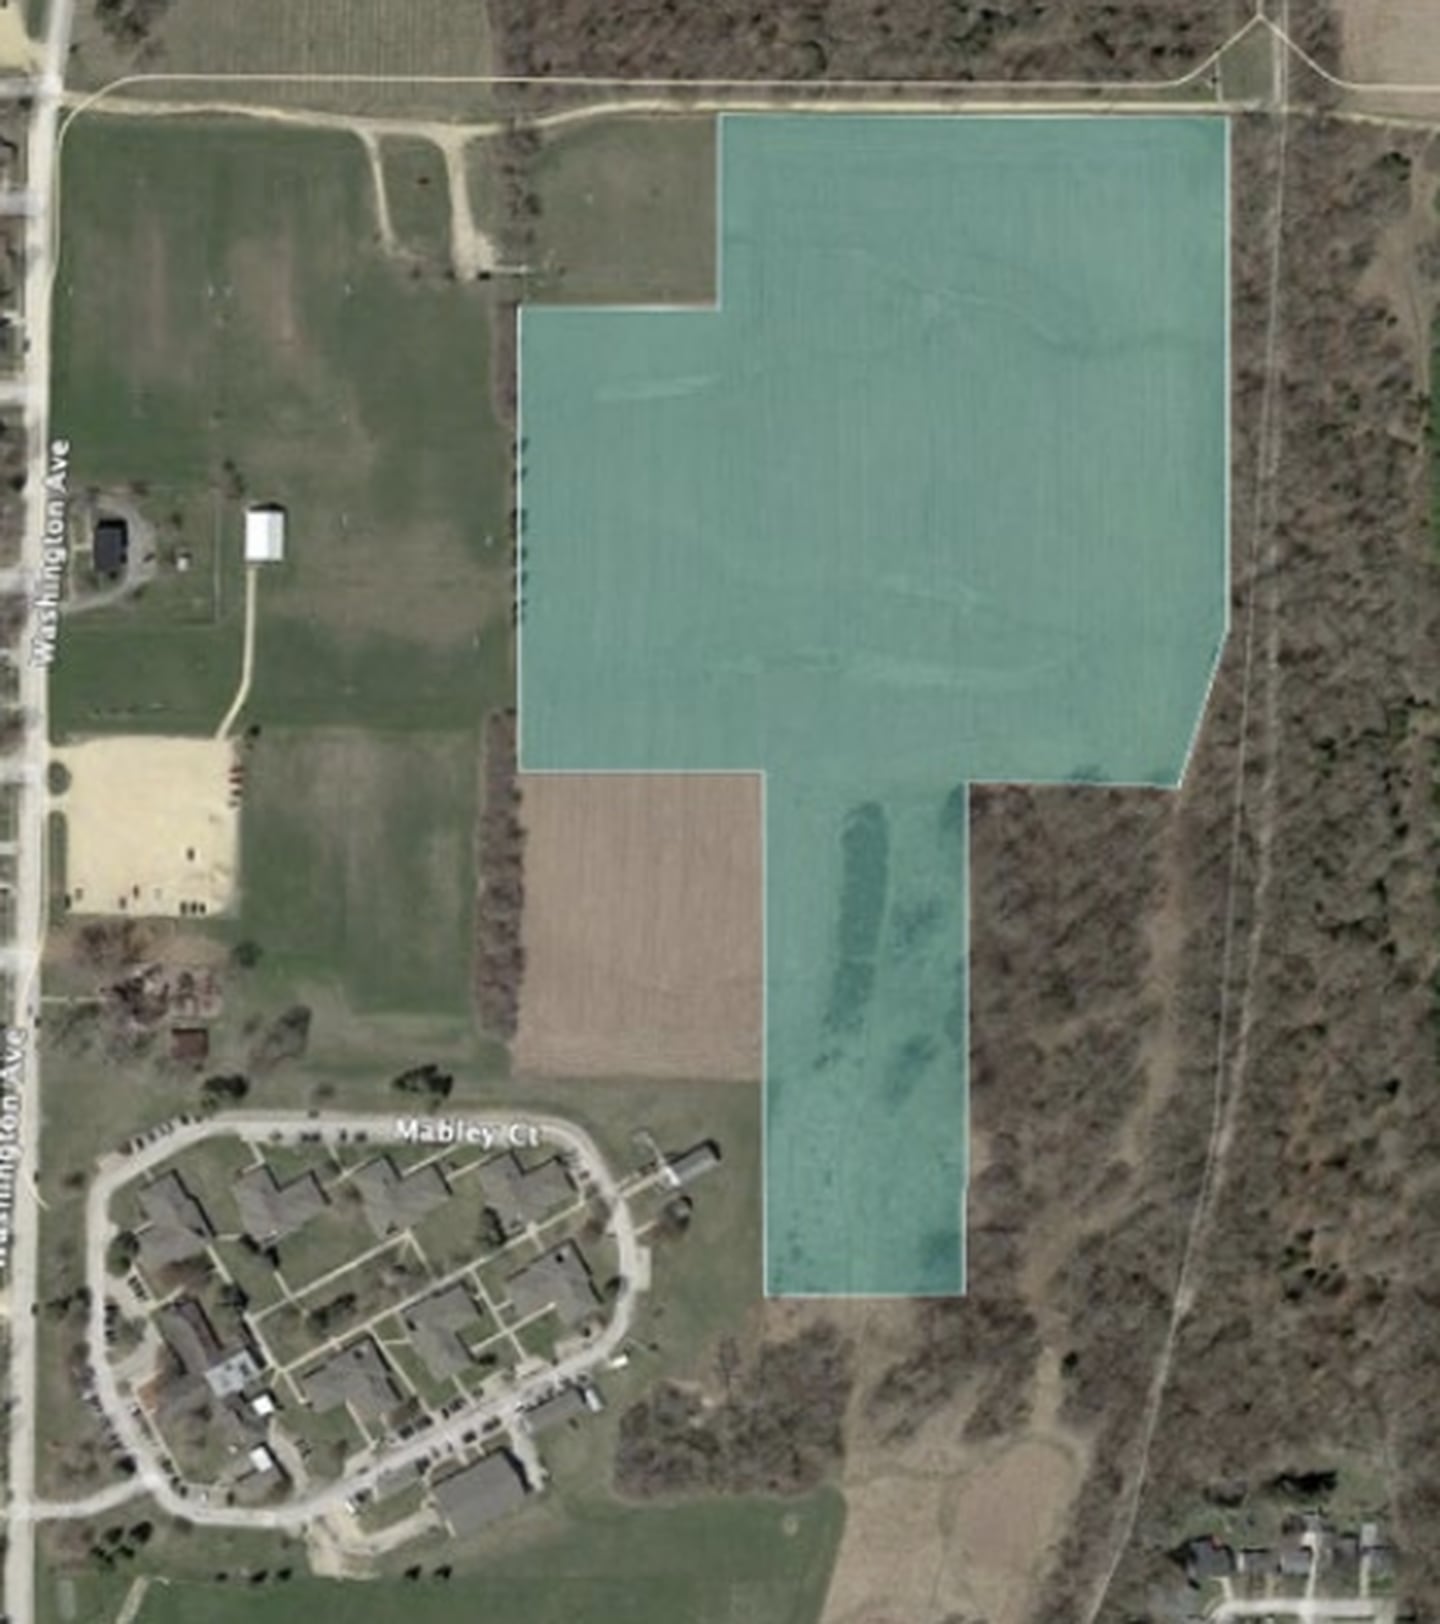 Trajectory Energy Partners is leasing 24 acres from the Dixon Park District to build a 5 megawatt solar farm in Meadows Park.